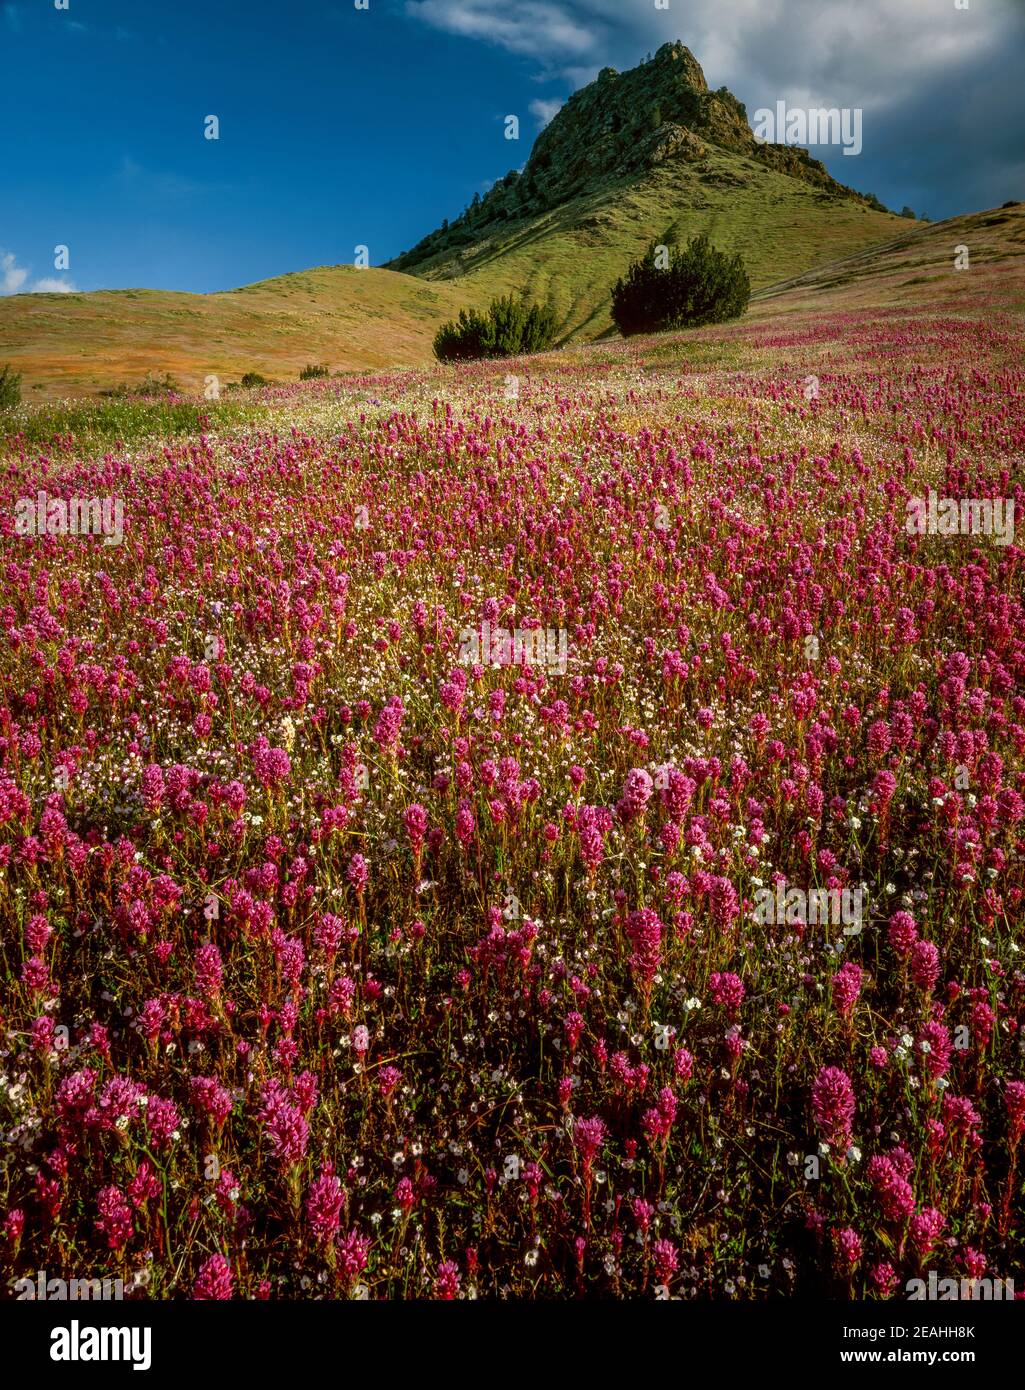 Owls Clover, Kern Valley, Kern County, Sequoia National Forest, Sierra Nevada Mountains, California Stock Photo